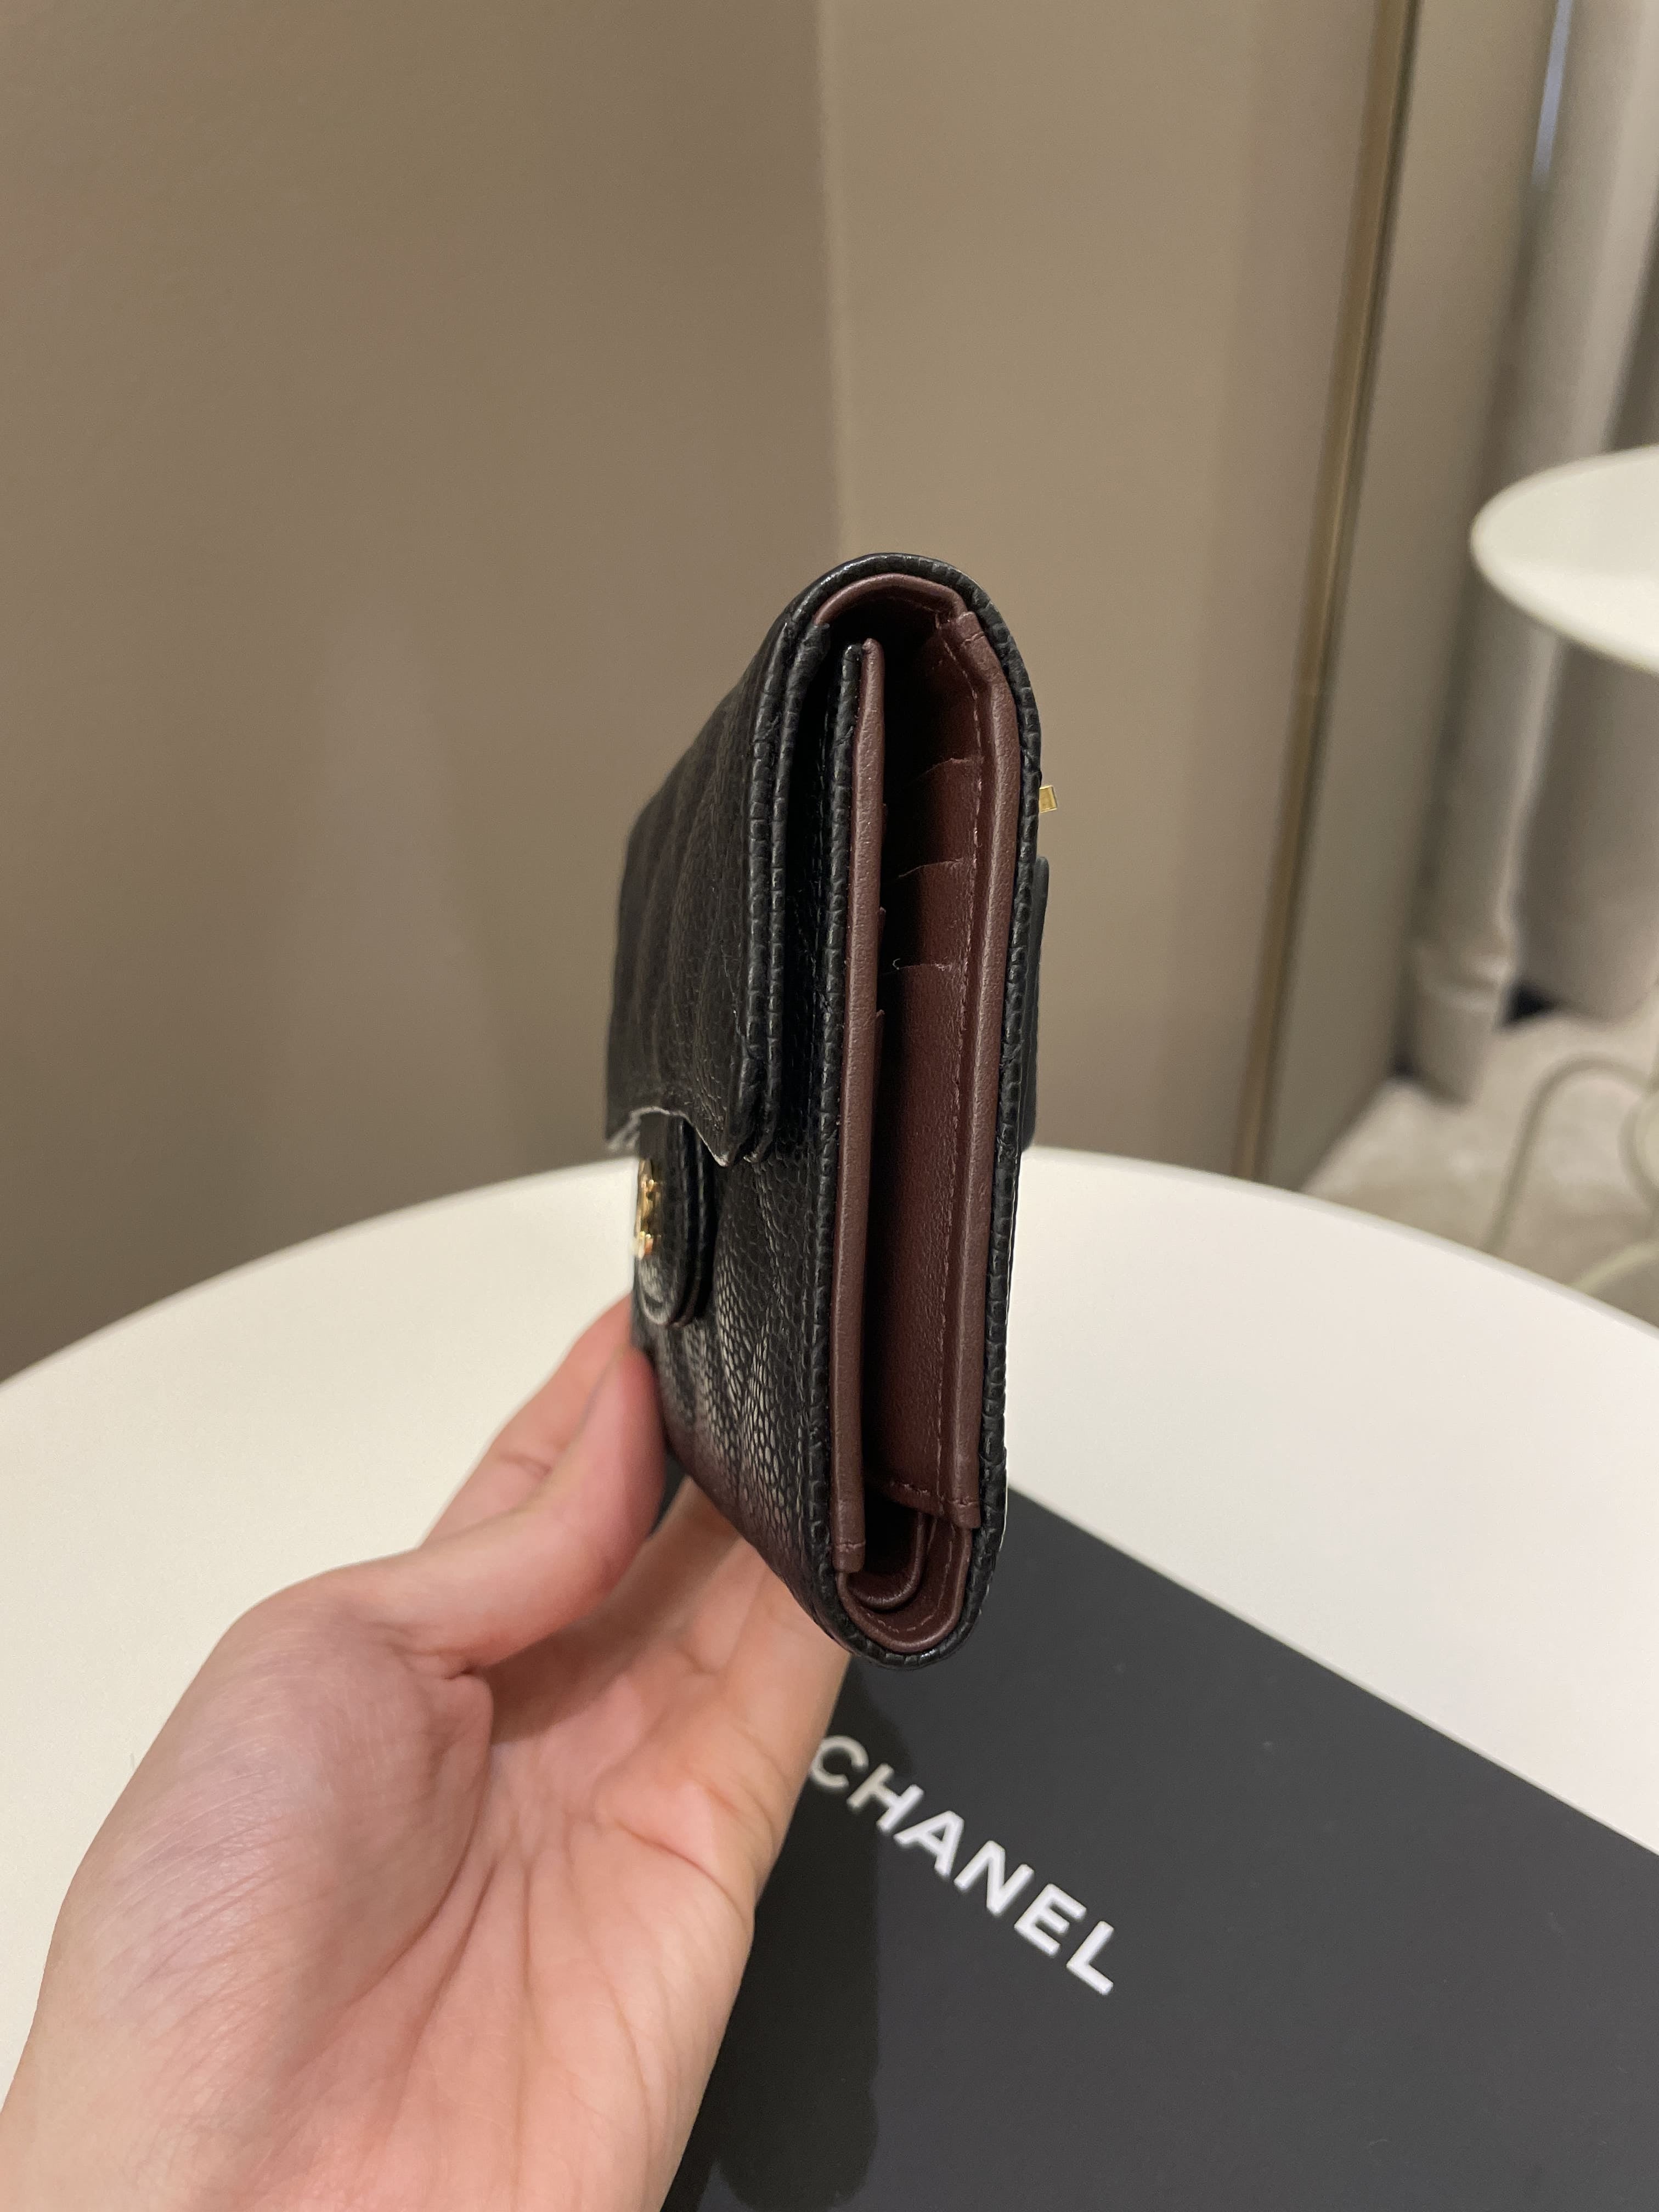 Chanel Small Classic Flap Wallet - 1 MONTH WEAR AND TEAR REVIEW! 